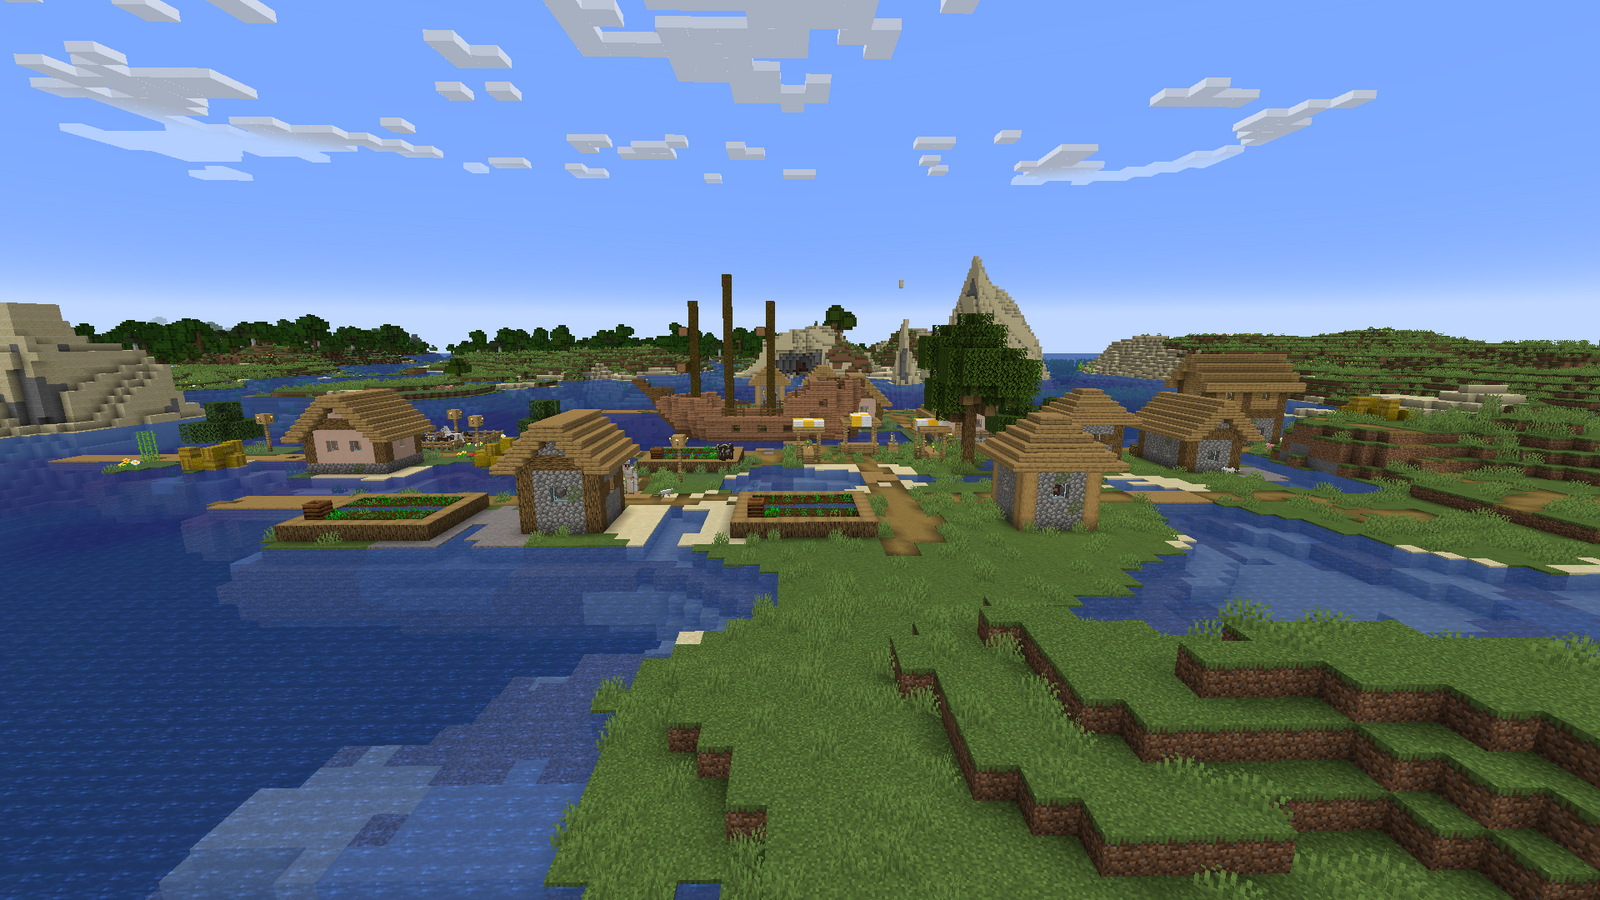 A Minecraft village beside the ocean, with a pirate ship in the docks.